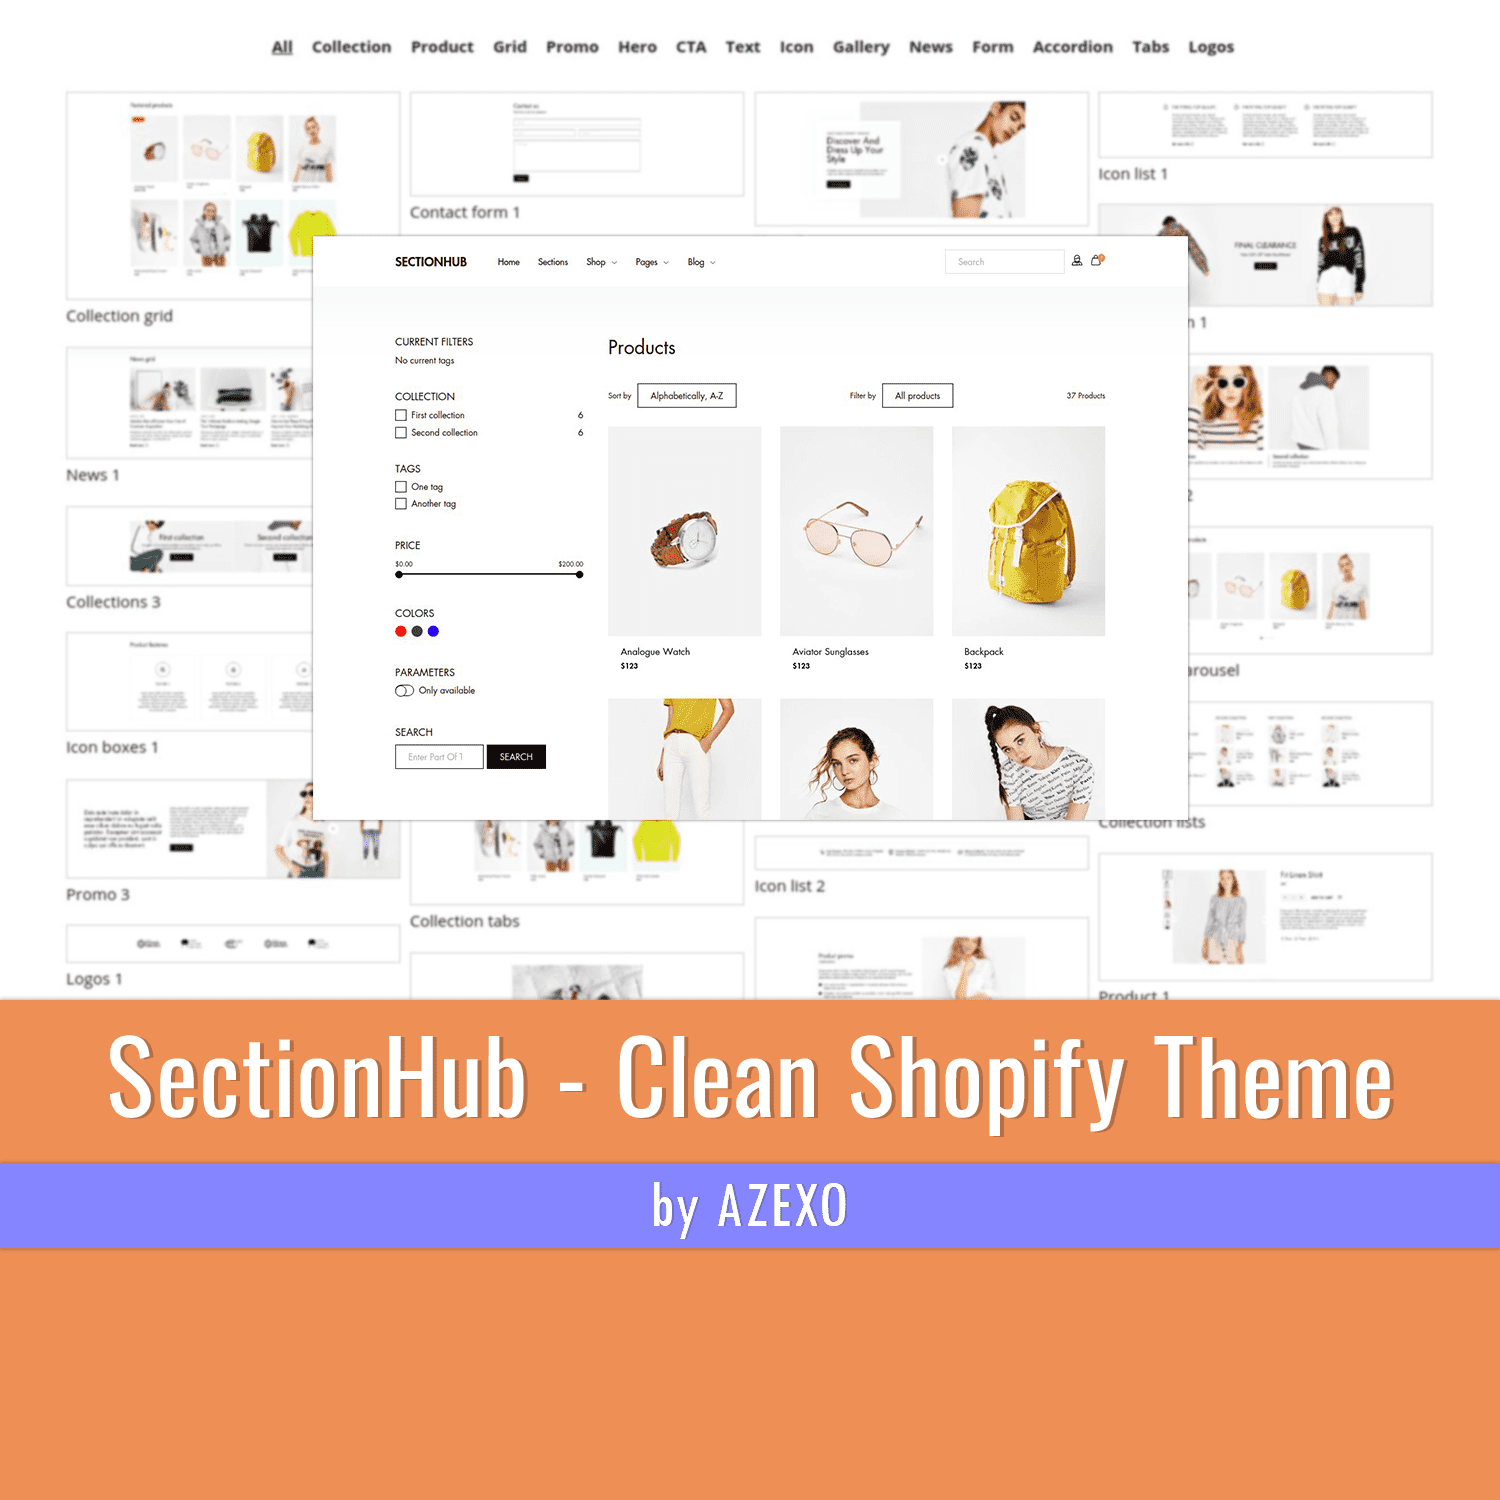 Products of SectionHub - Clean Shopify Theme.